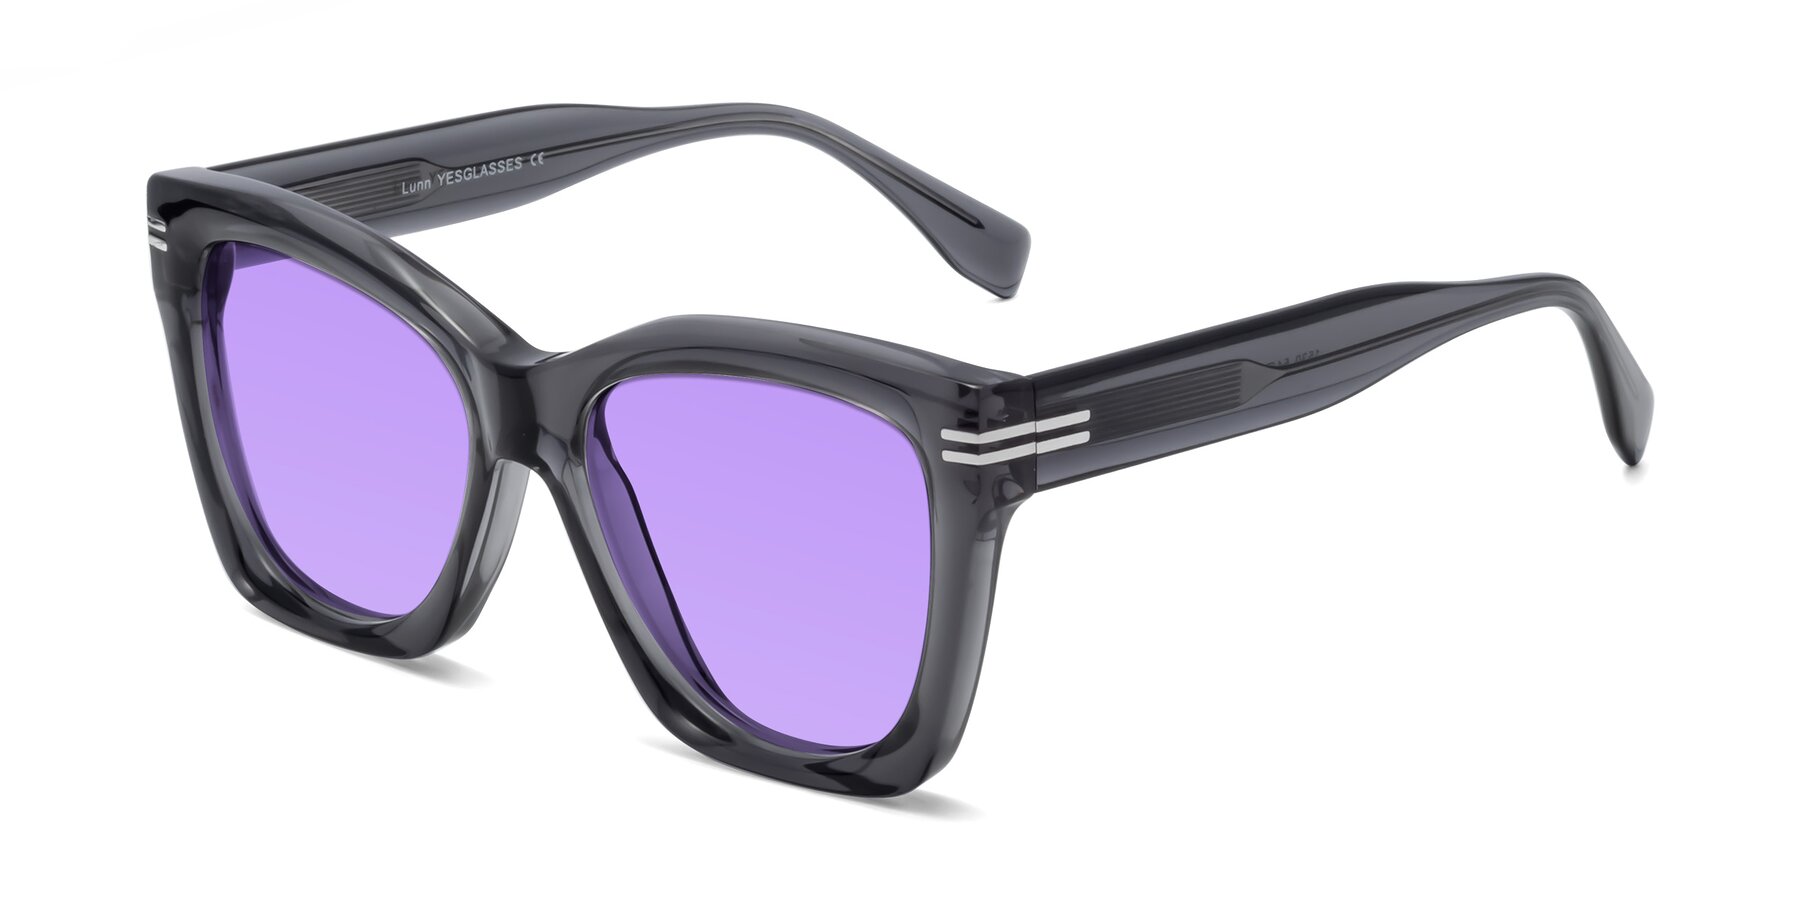 Angle of Lunn in Translucent Gray with Medium Purple Tinted Lenses